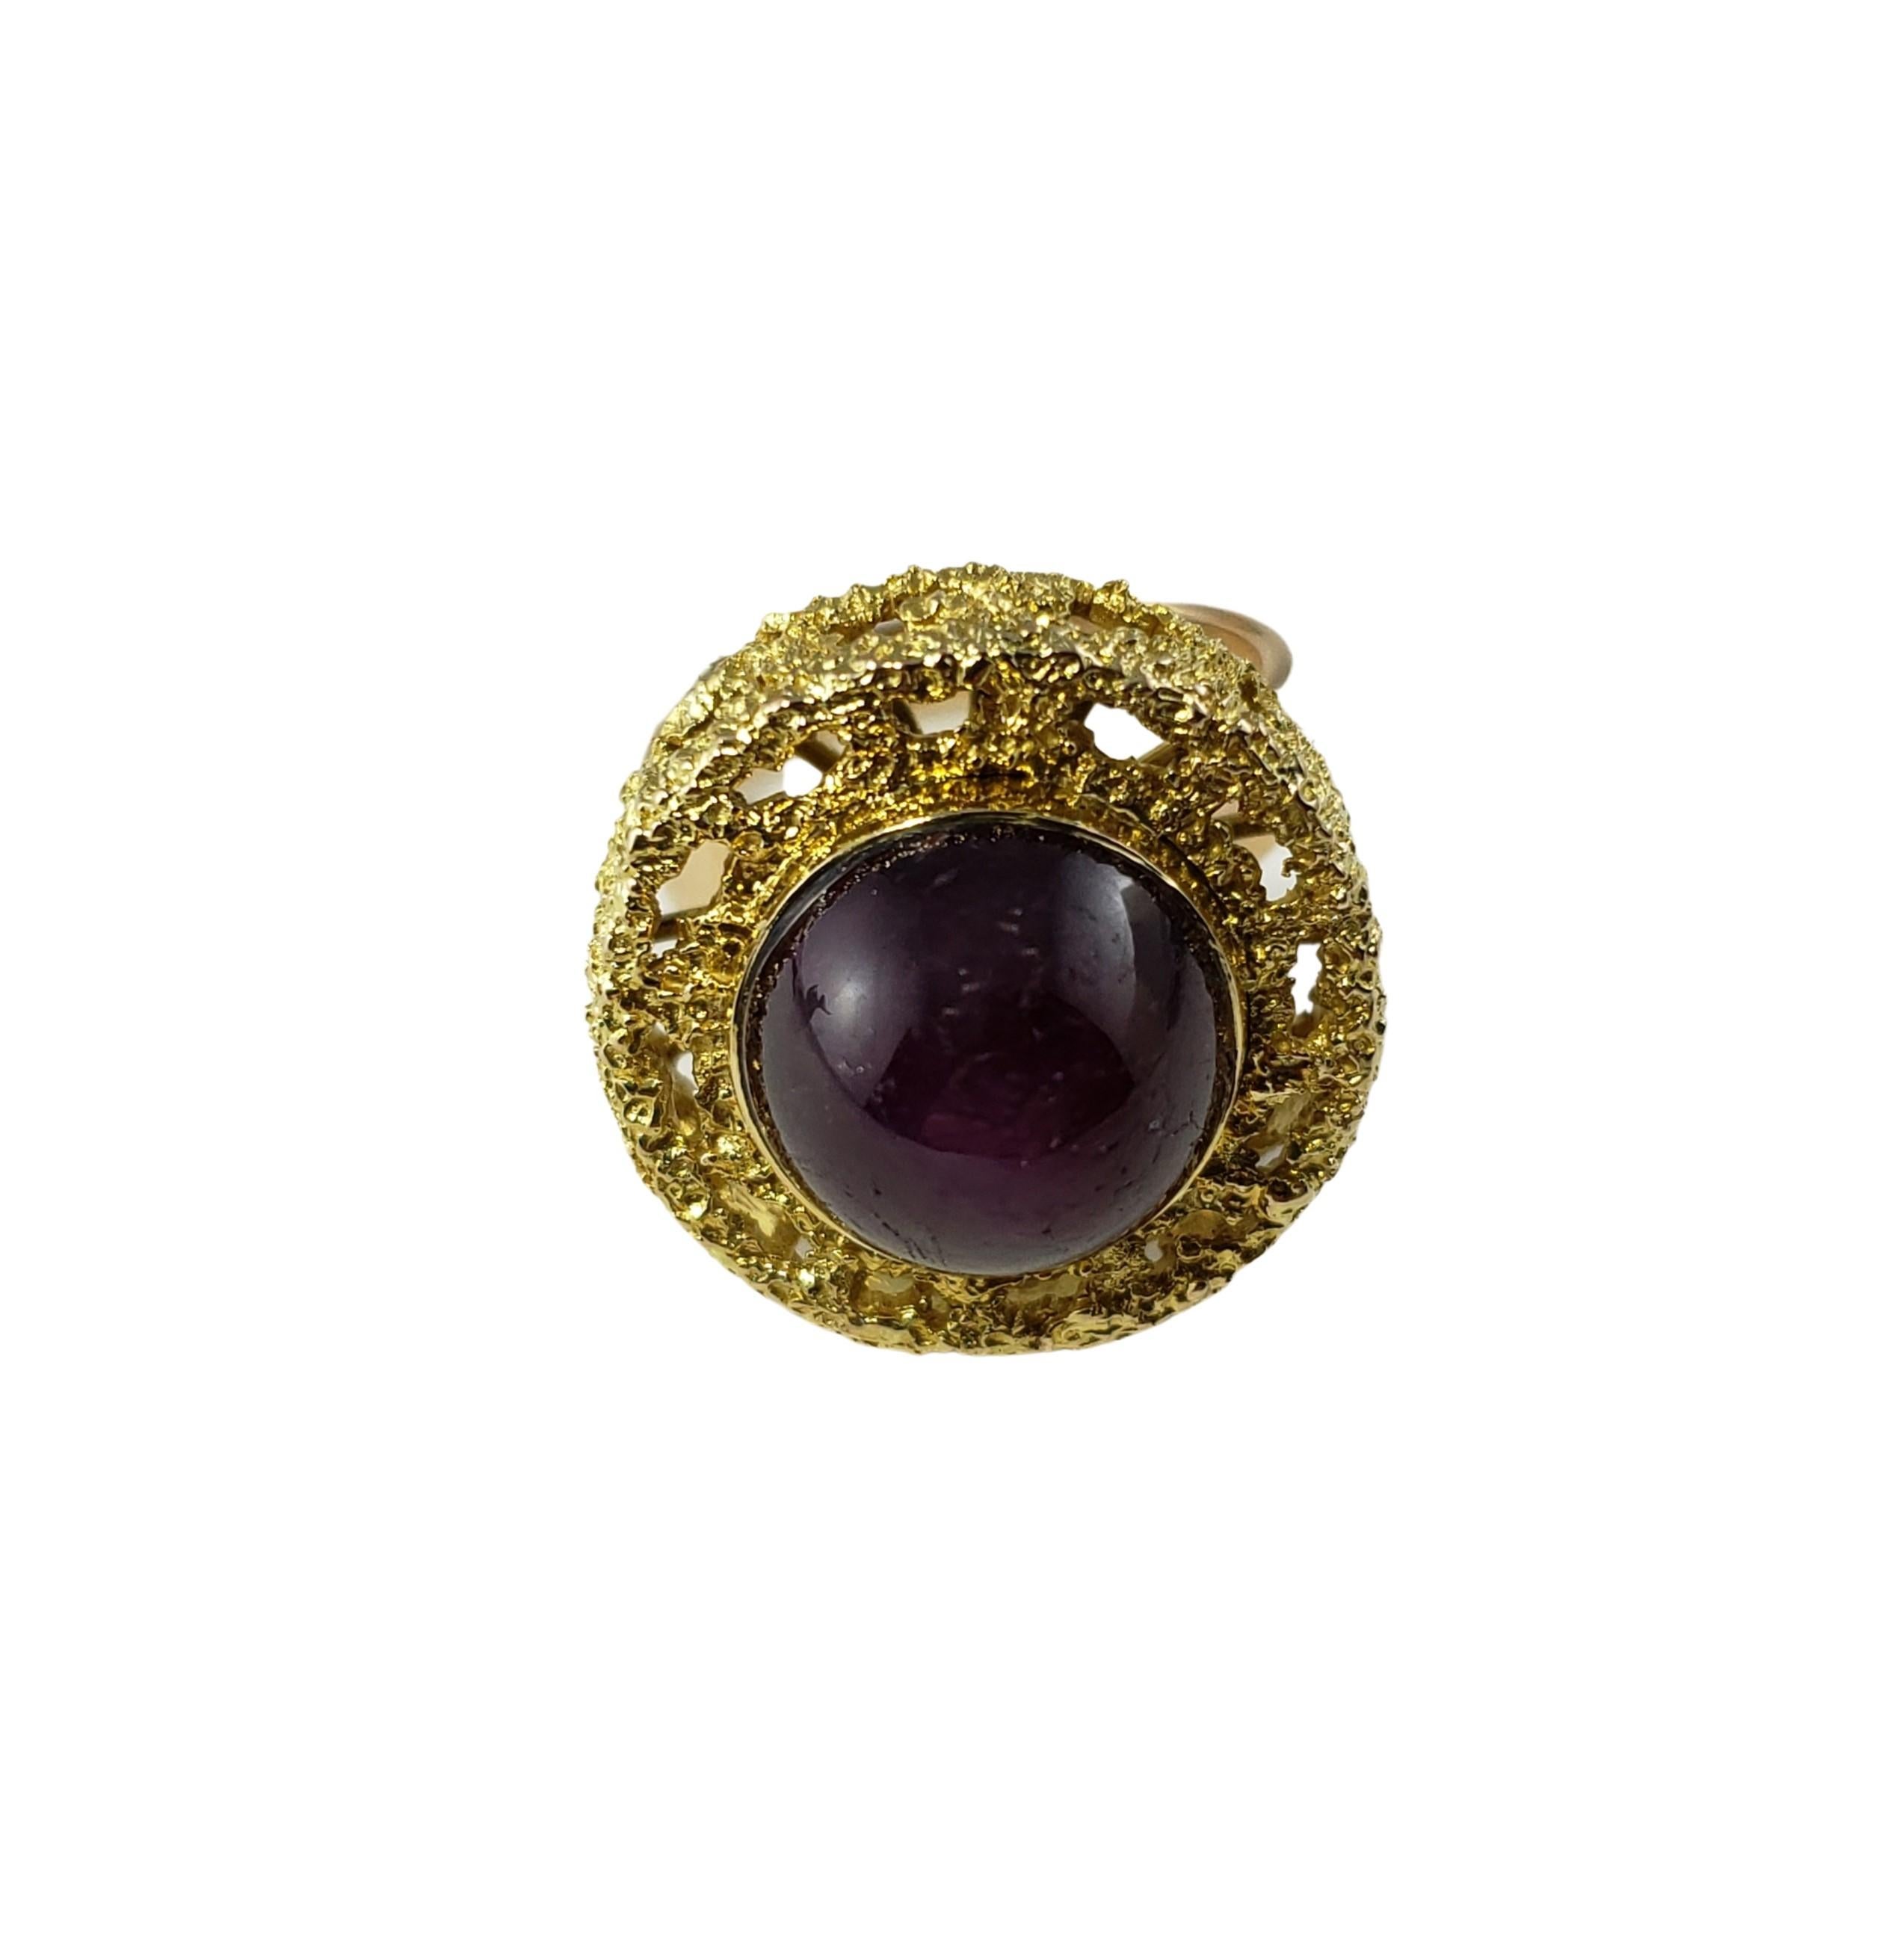 14 Karat Yellow Gold Star Ruby Ring Size 7.75 GAI Certified-

This stunning ring features one round cabochon purple star ruby (12 mm) set in beautifully detailed 14K yellow gold. Width: 21 mm.
Height: 17 mm. Shank: 3.5 mm.

Ruby weight: 14 ct.

Ring